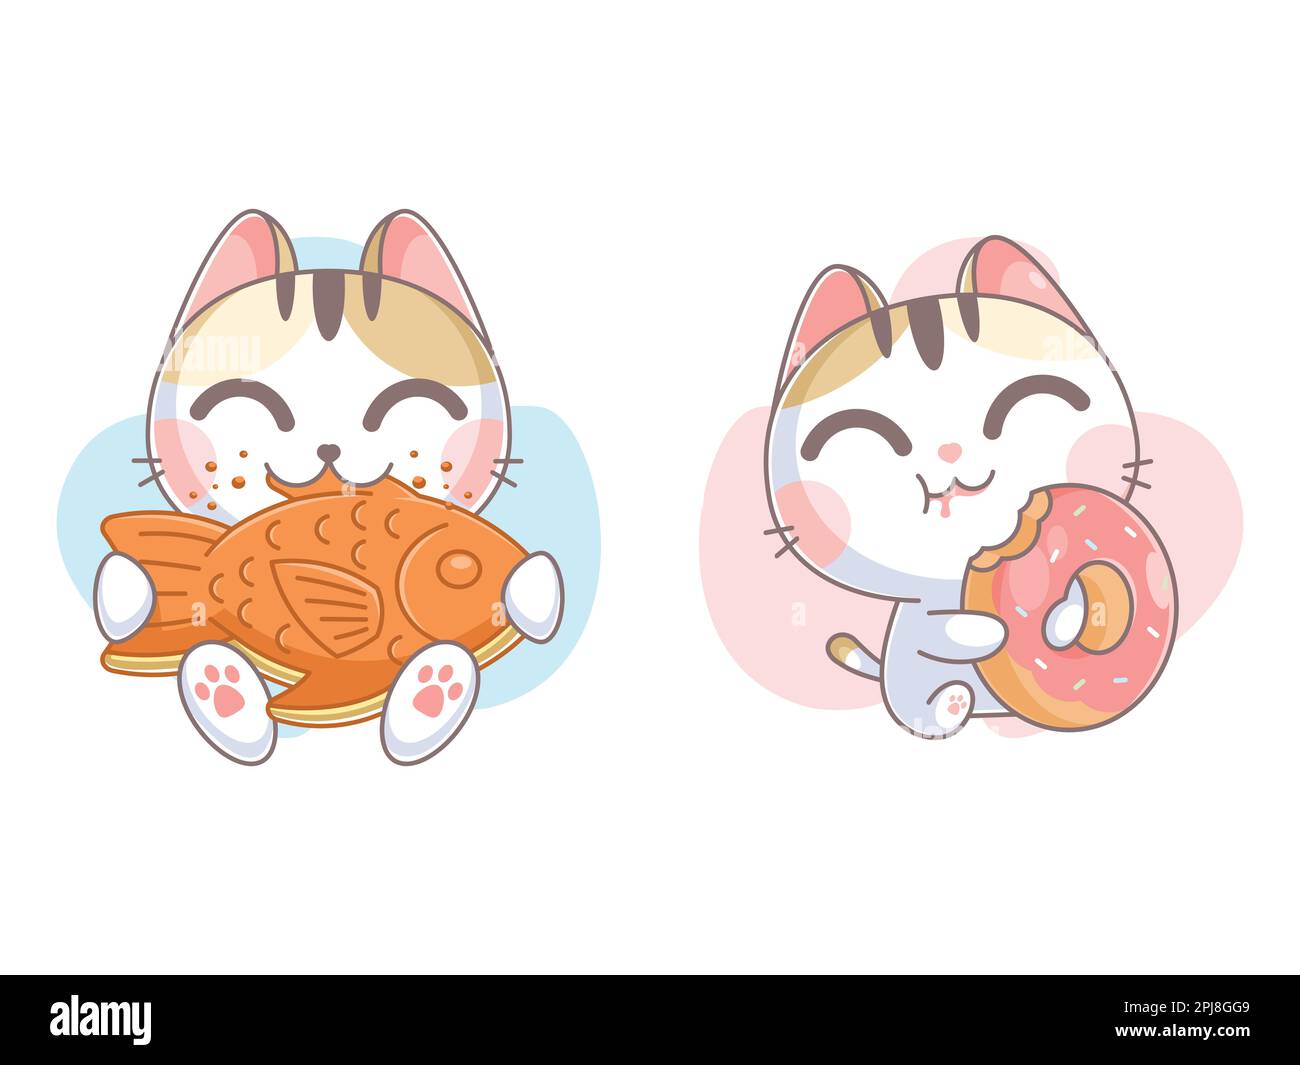 Kitten character eating bungeoppang and donut Stock Vector